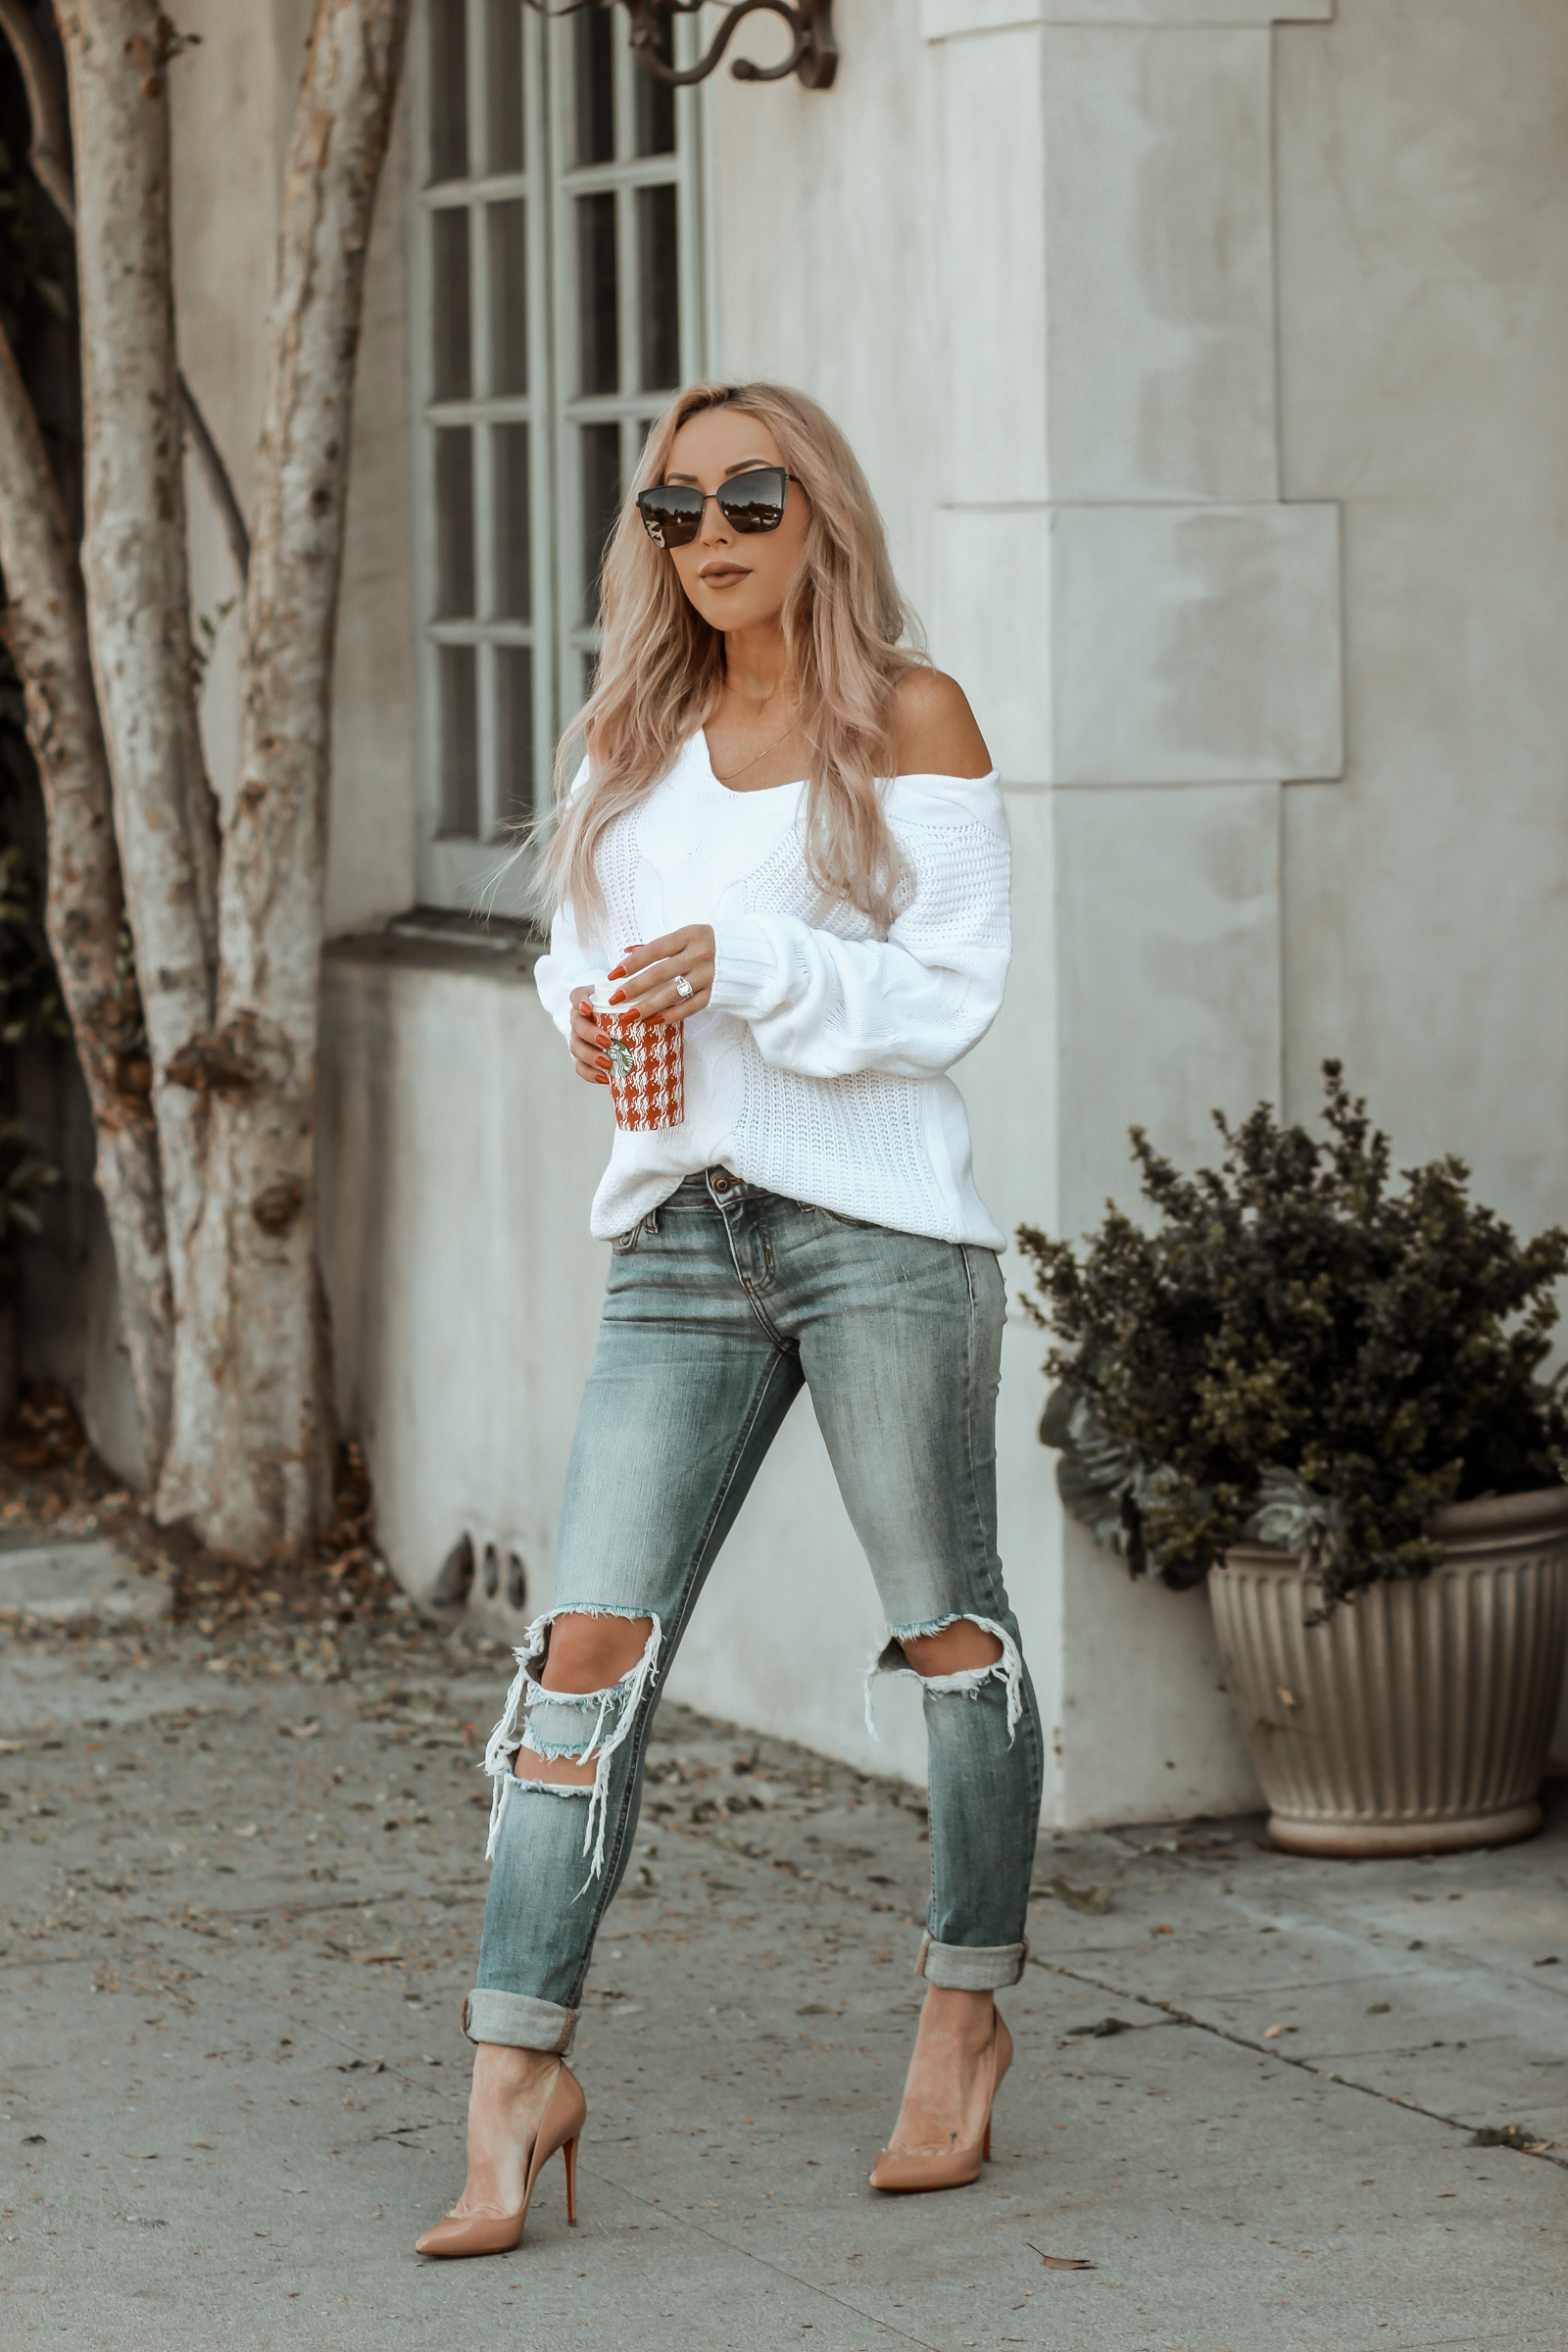 Fall Fashion | White Sweater | Fall Vibes | Cozy Weather | Blondie in the City by Hayley Larue